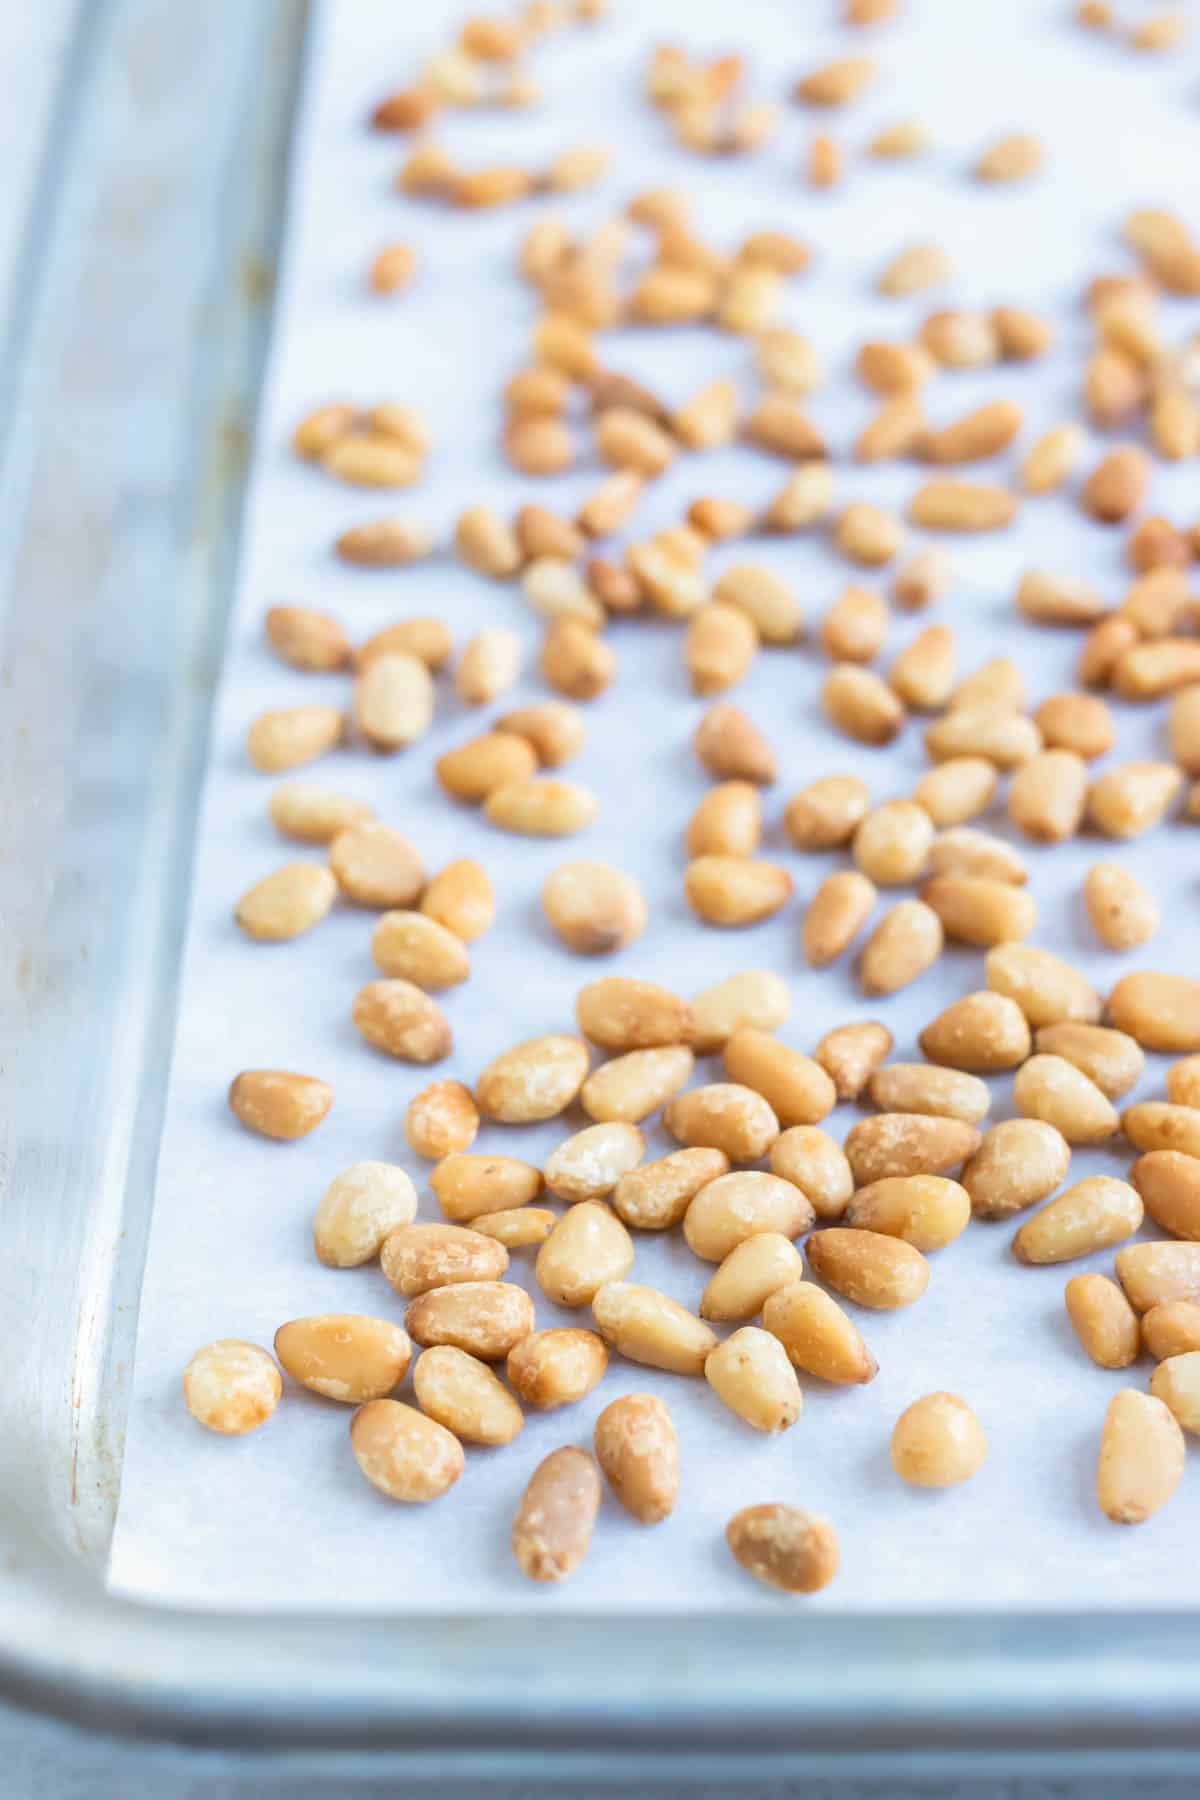 Pine nuts are roasted in the oven for a buttery, crunchy addition to your salad.